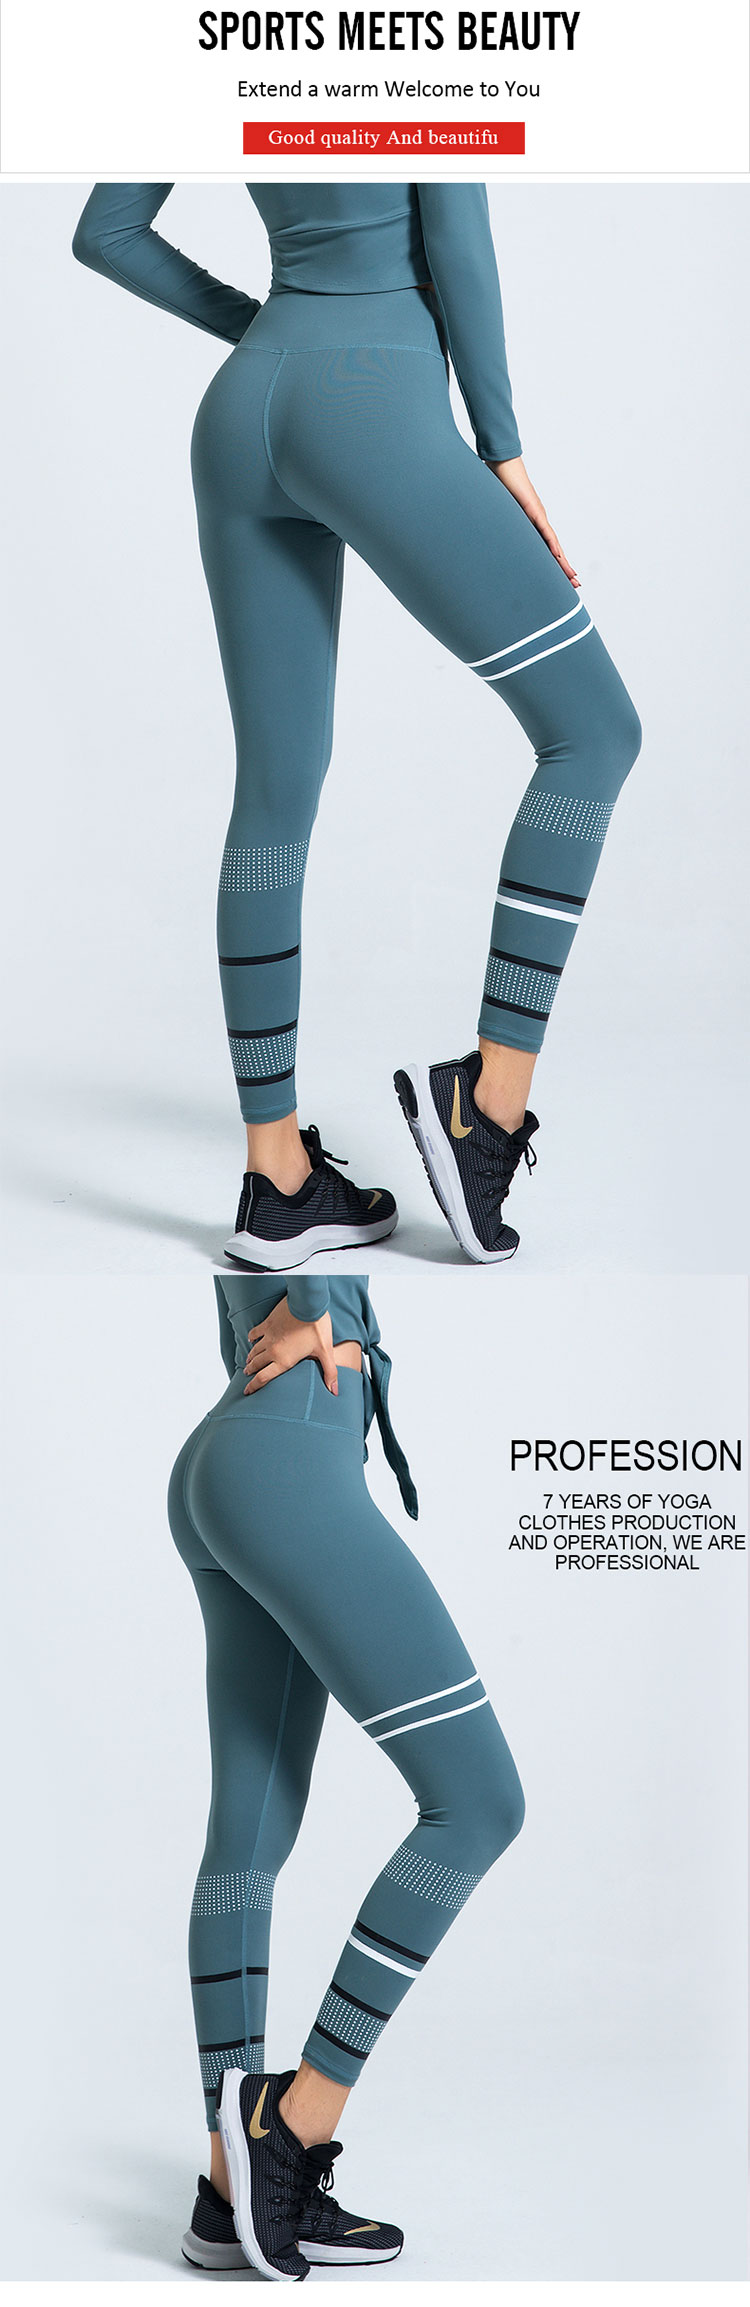 Superposition-technique-of-the-striped-workout-pants-is-not-fresh,-so-it-is-very-important--in-the-design